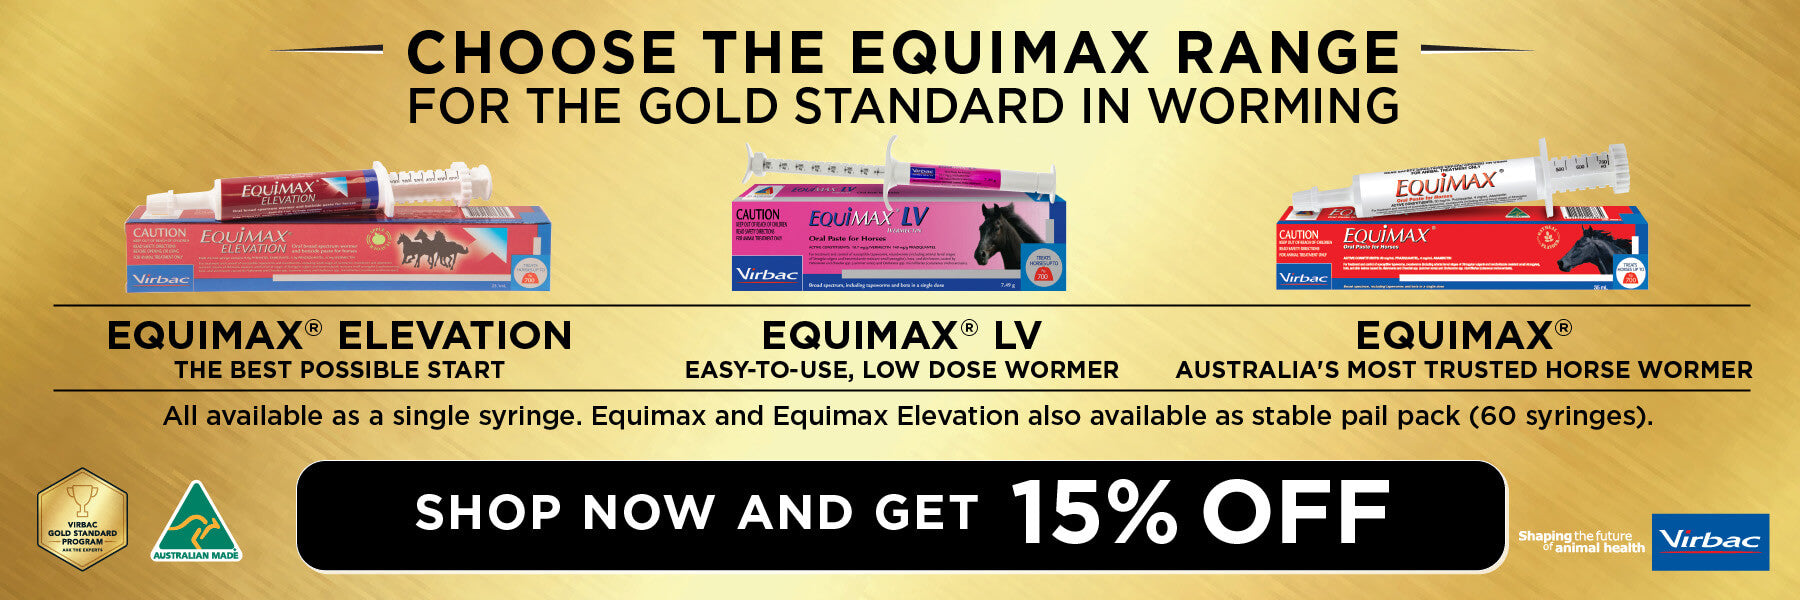 Equimax Horse Wormers ON SALE NOW